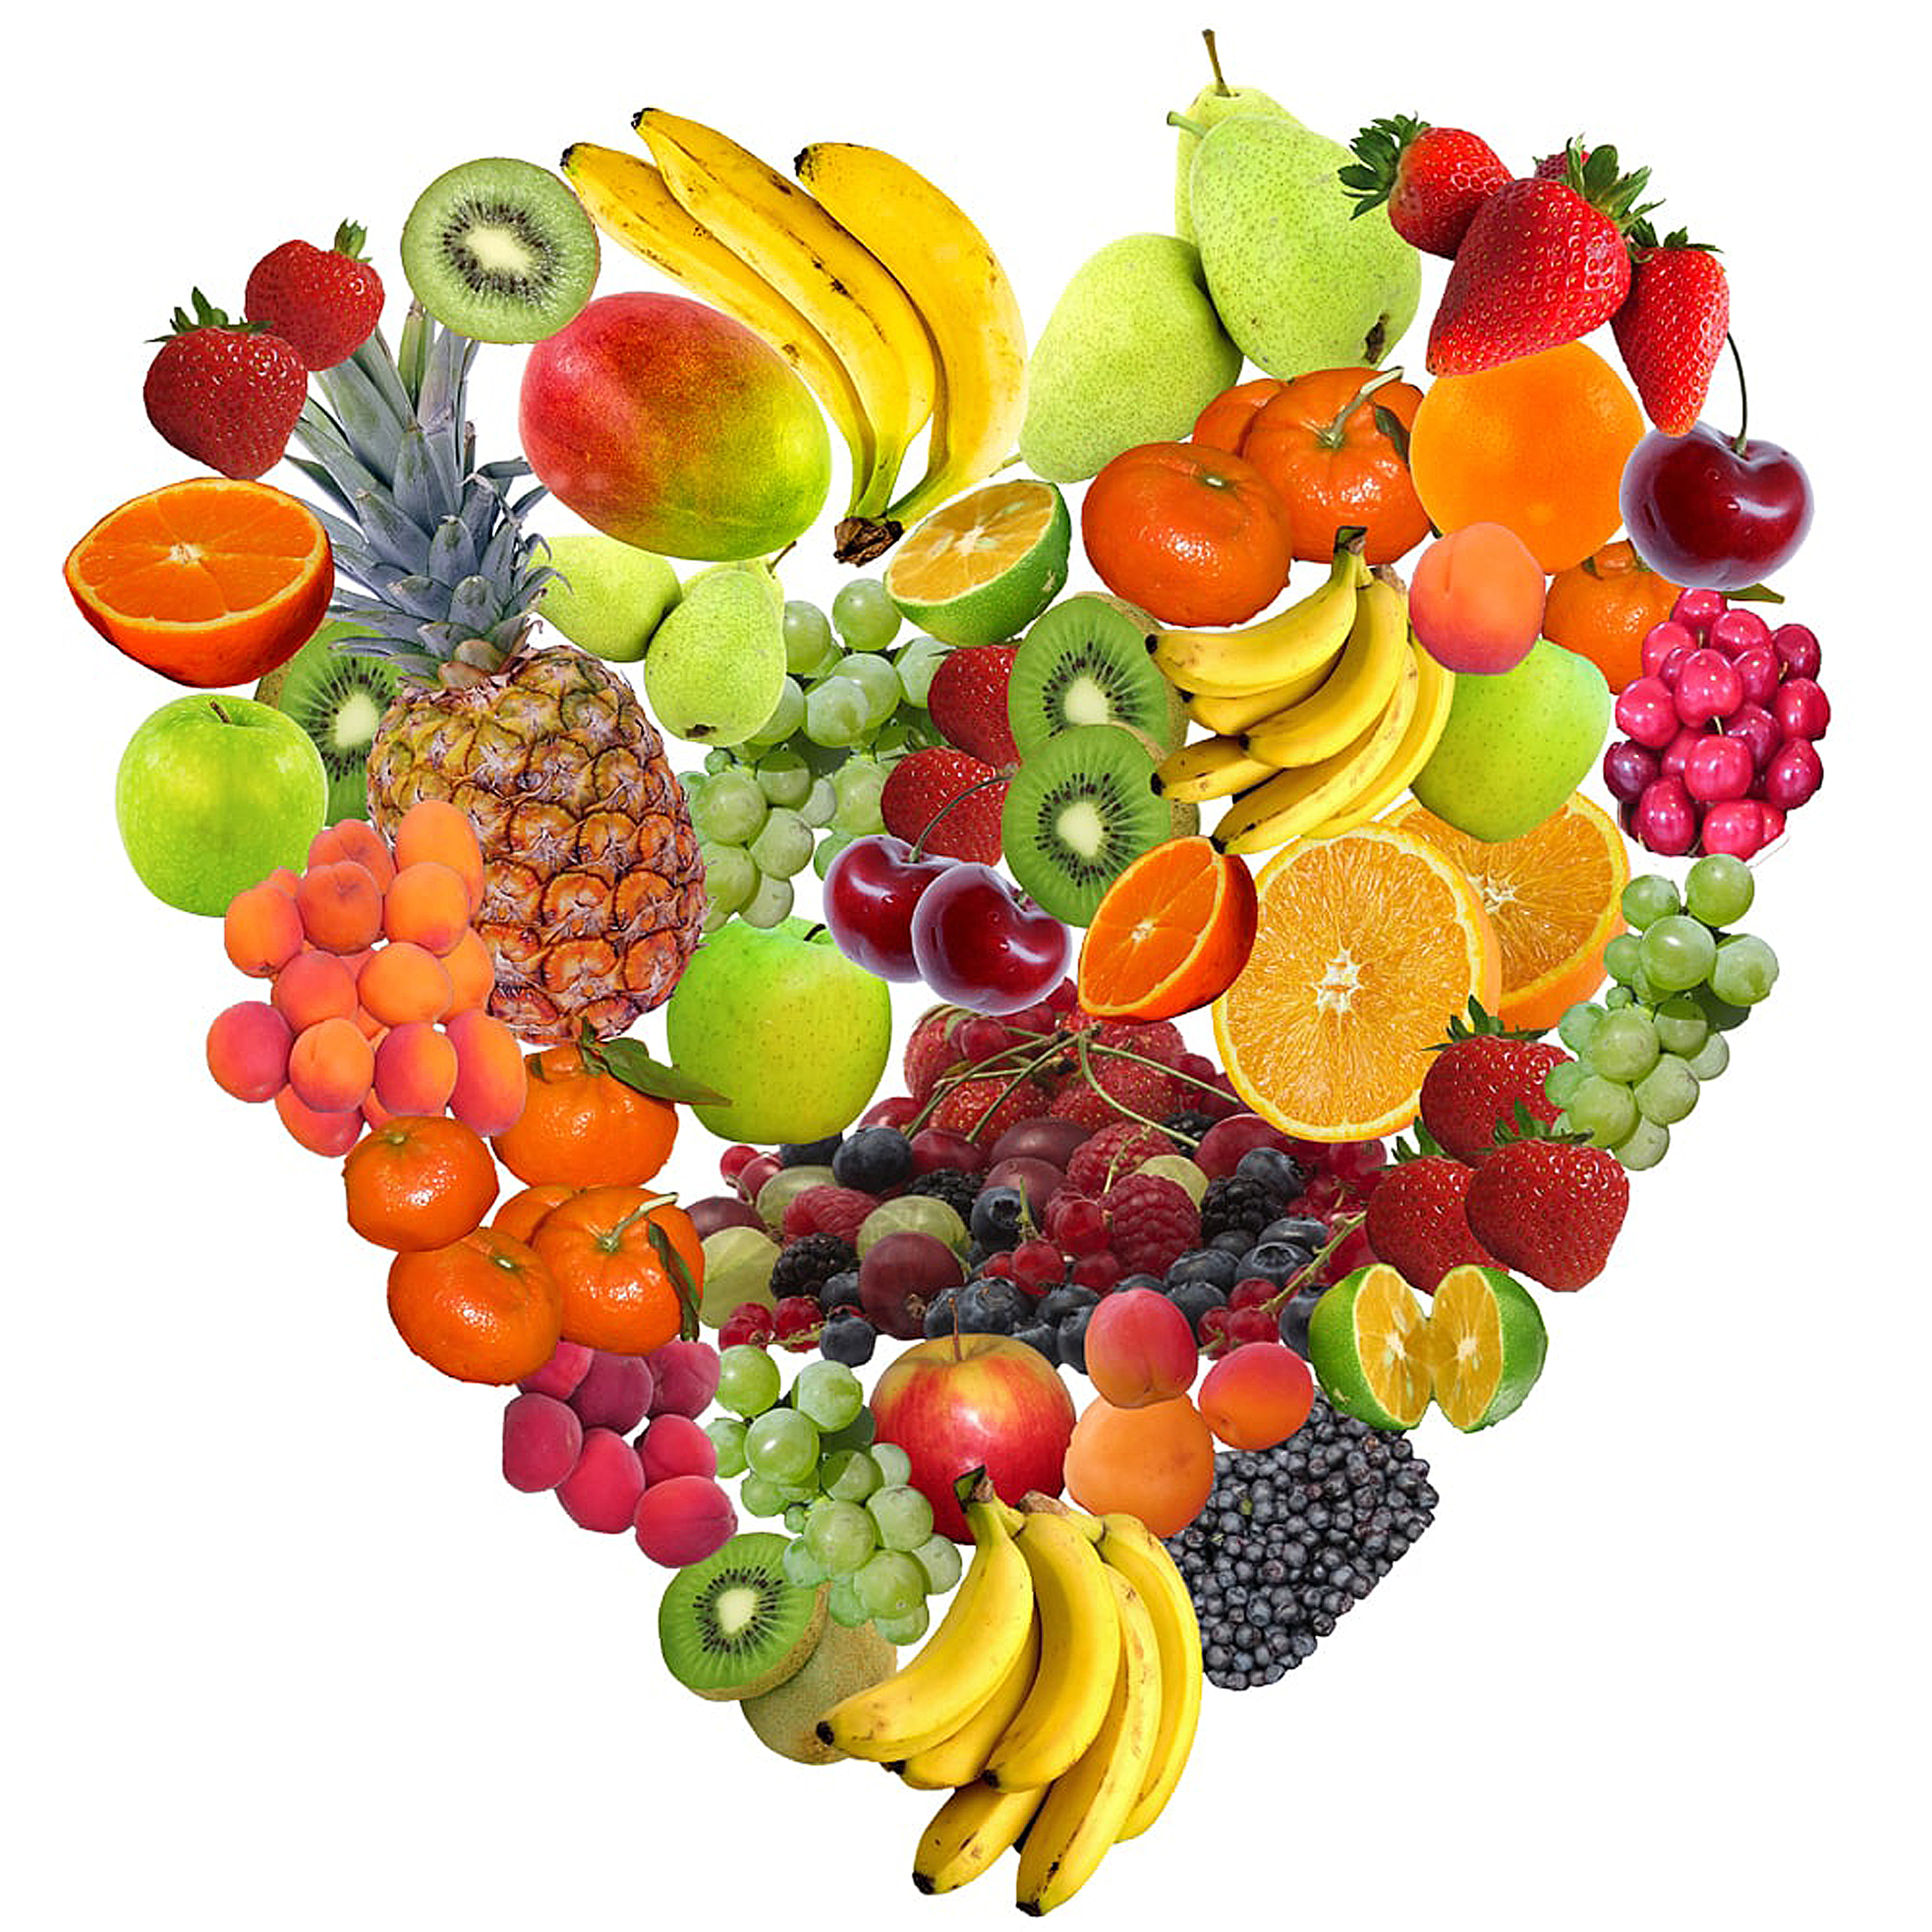 Eat fruit and vegetables every day for a healthy diet.